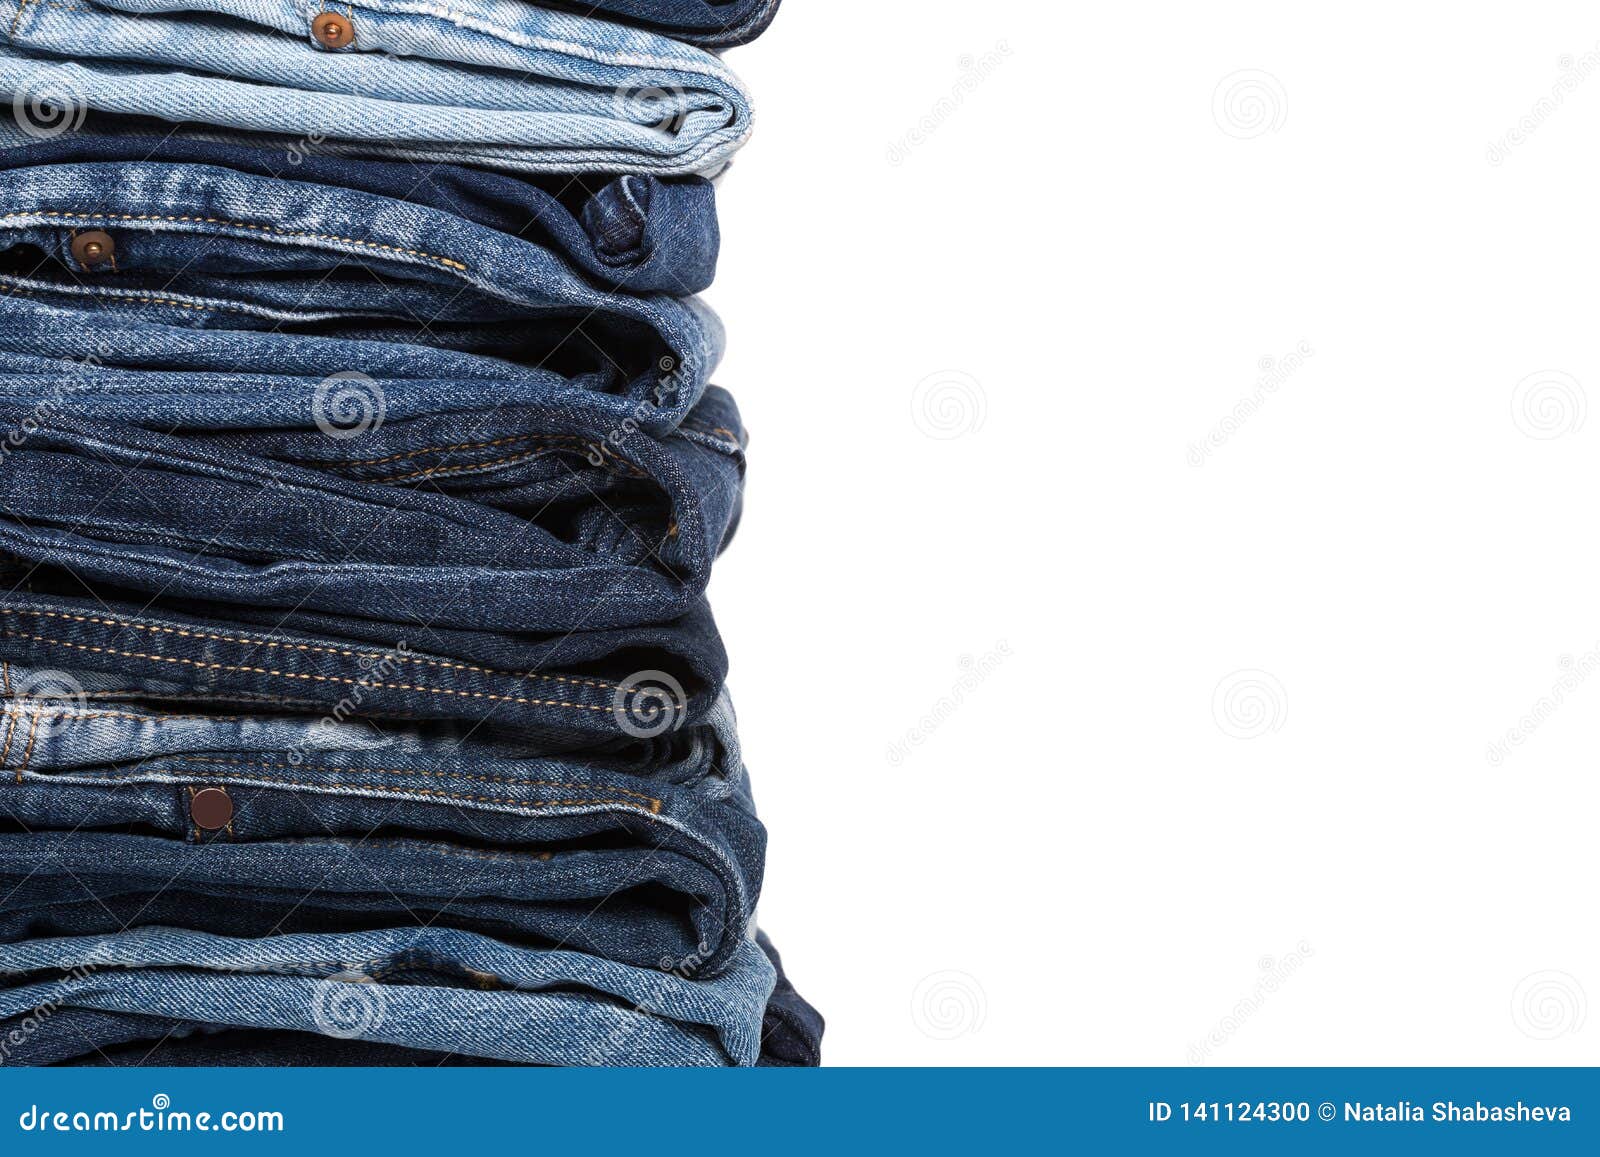 Stack of Various Shades of Blue Jeans Stock Photo - Image of material ...